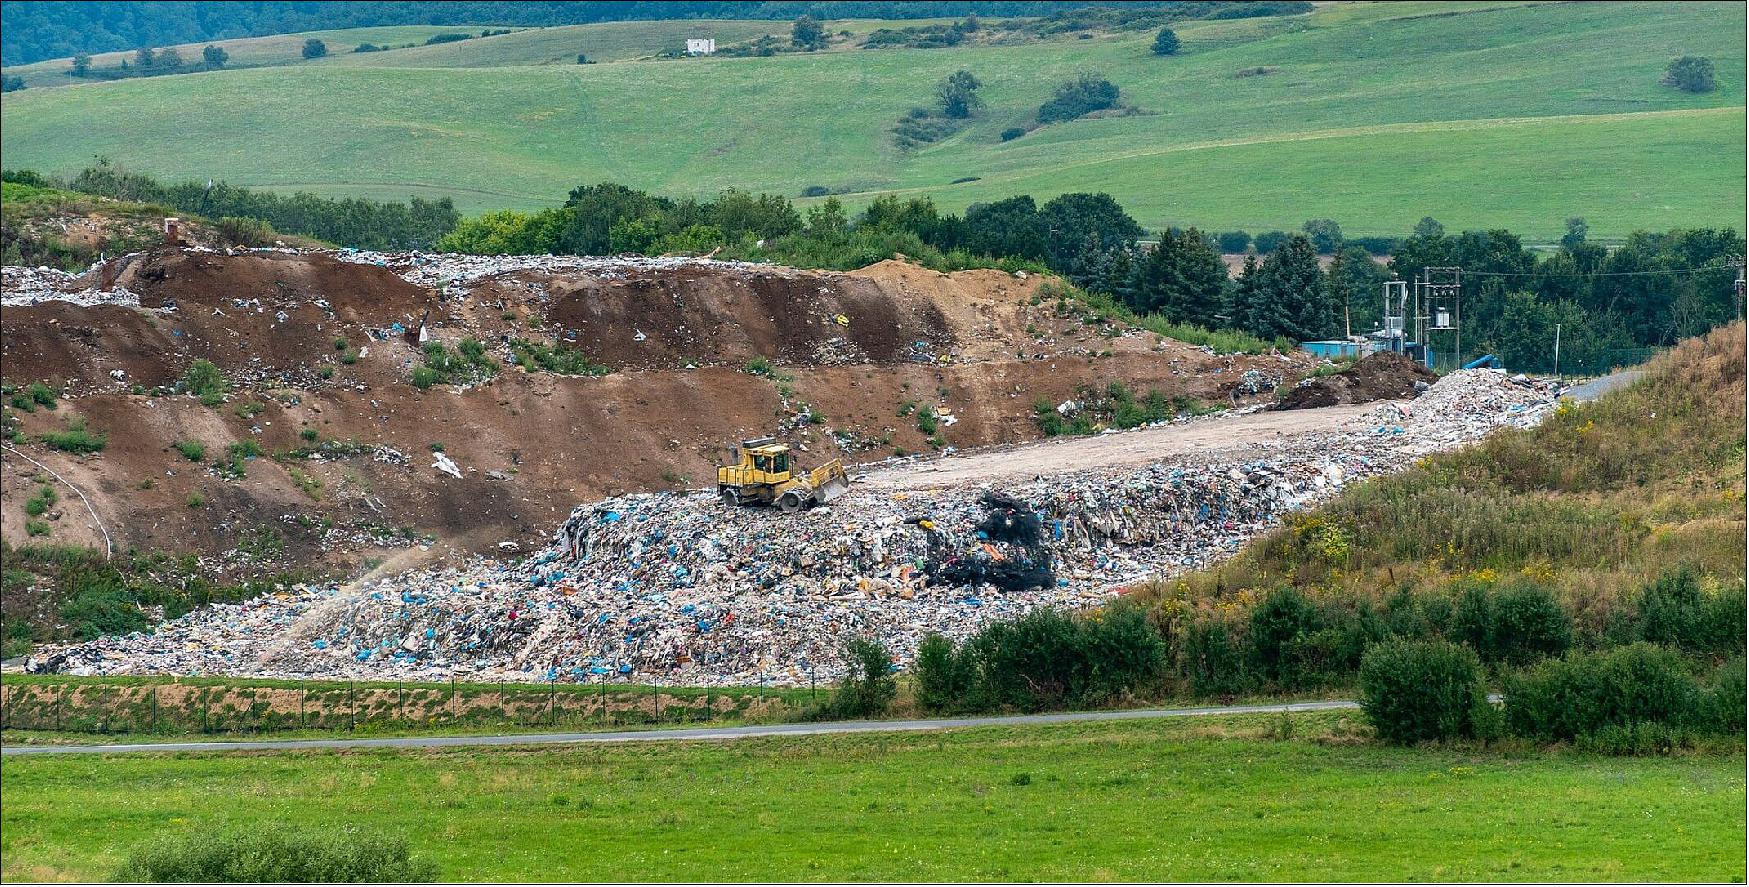 Figure 11: Photo of the Landfill site near Madrid, Spain (credit: Pixabay)